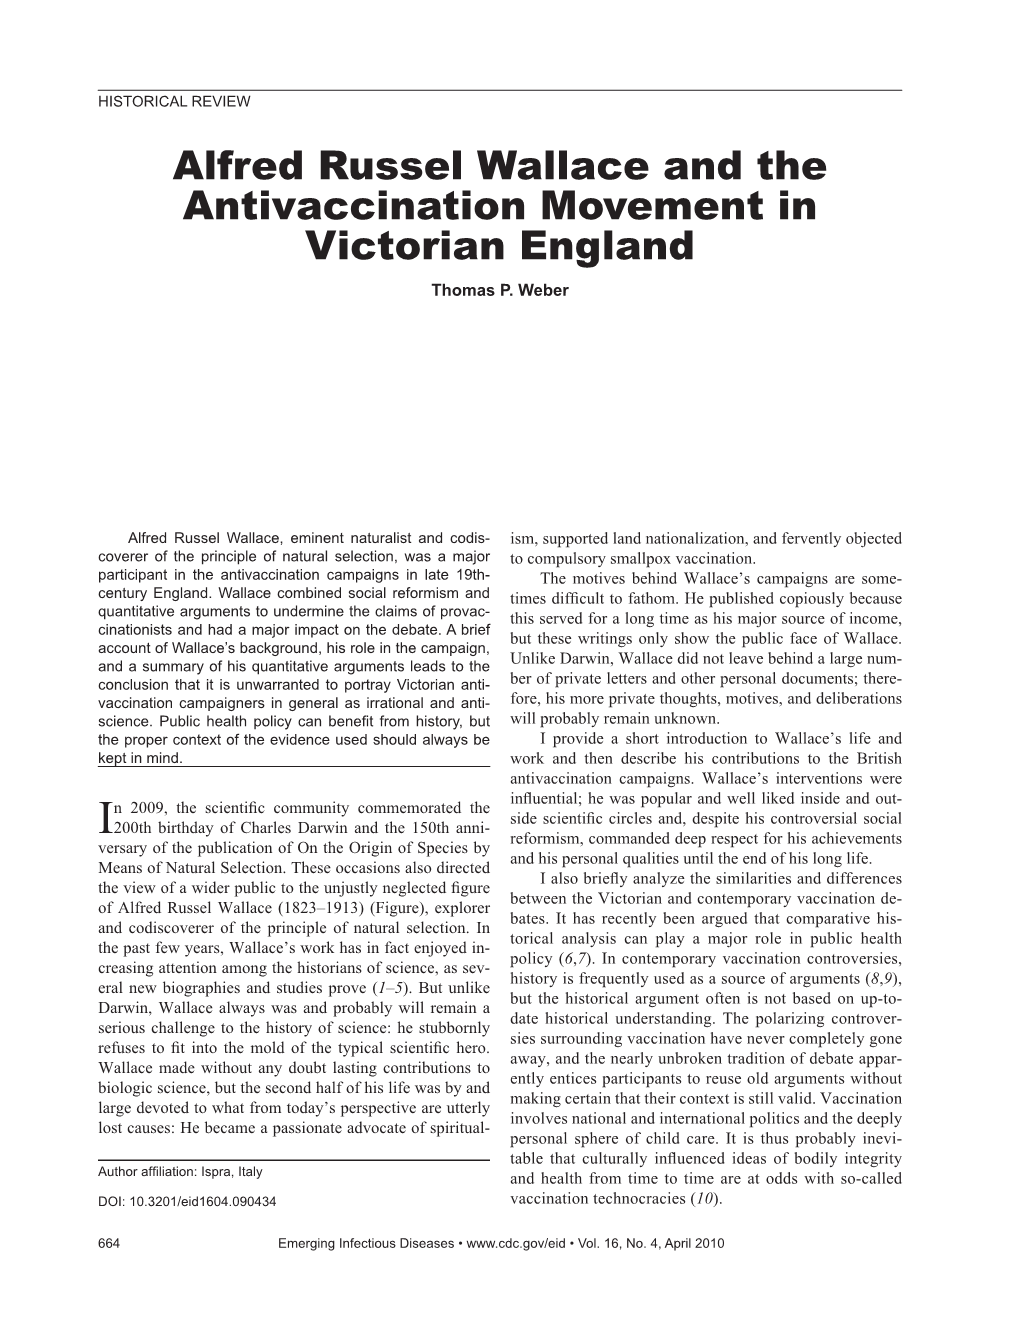 Alfred Russel Wallace and the Antivaccination Movement in Victorian England Thomas P